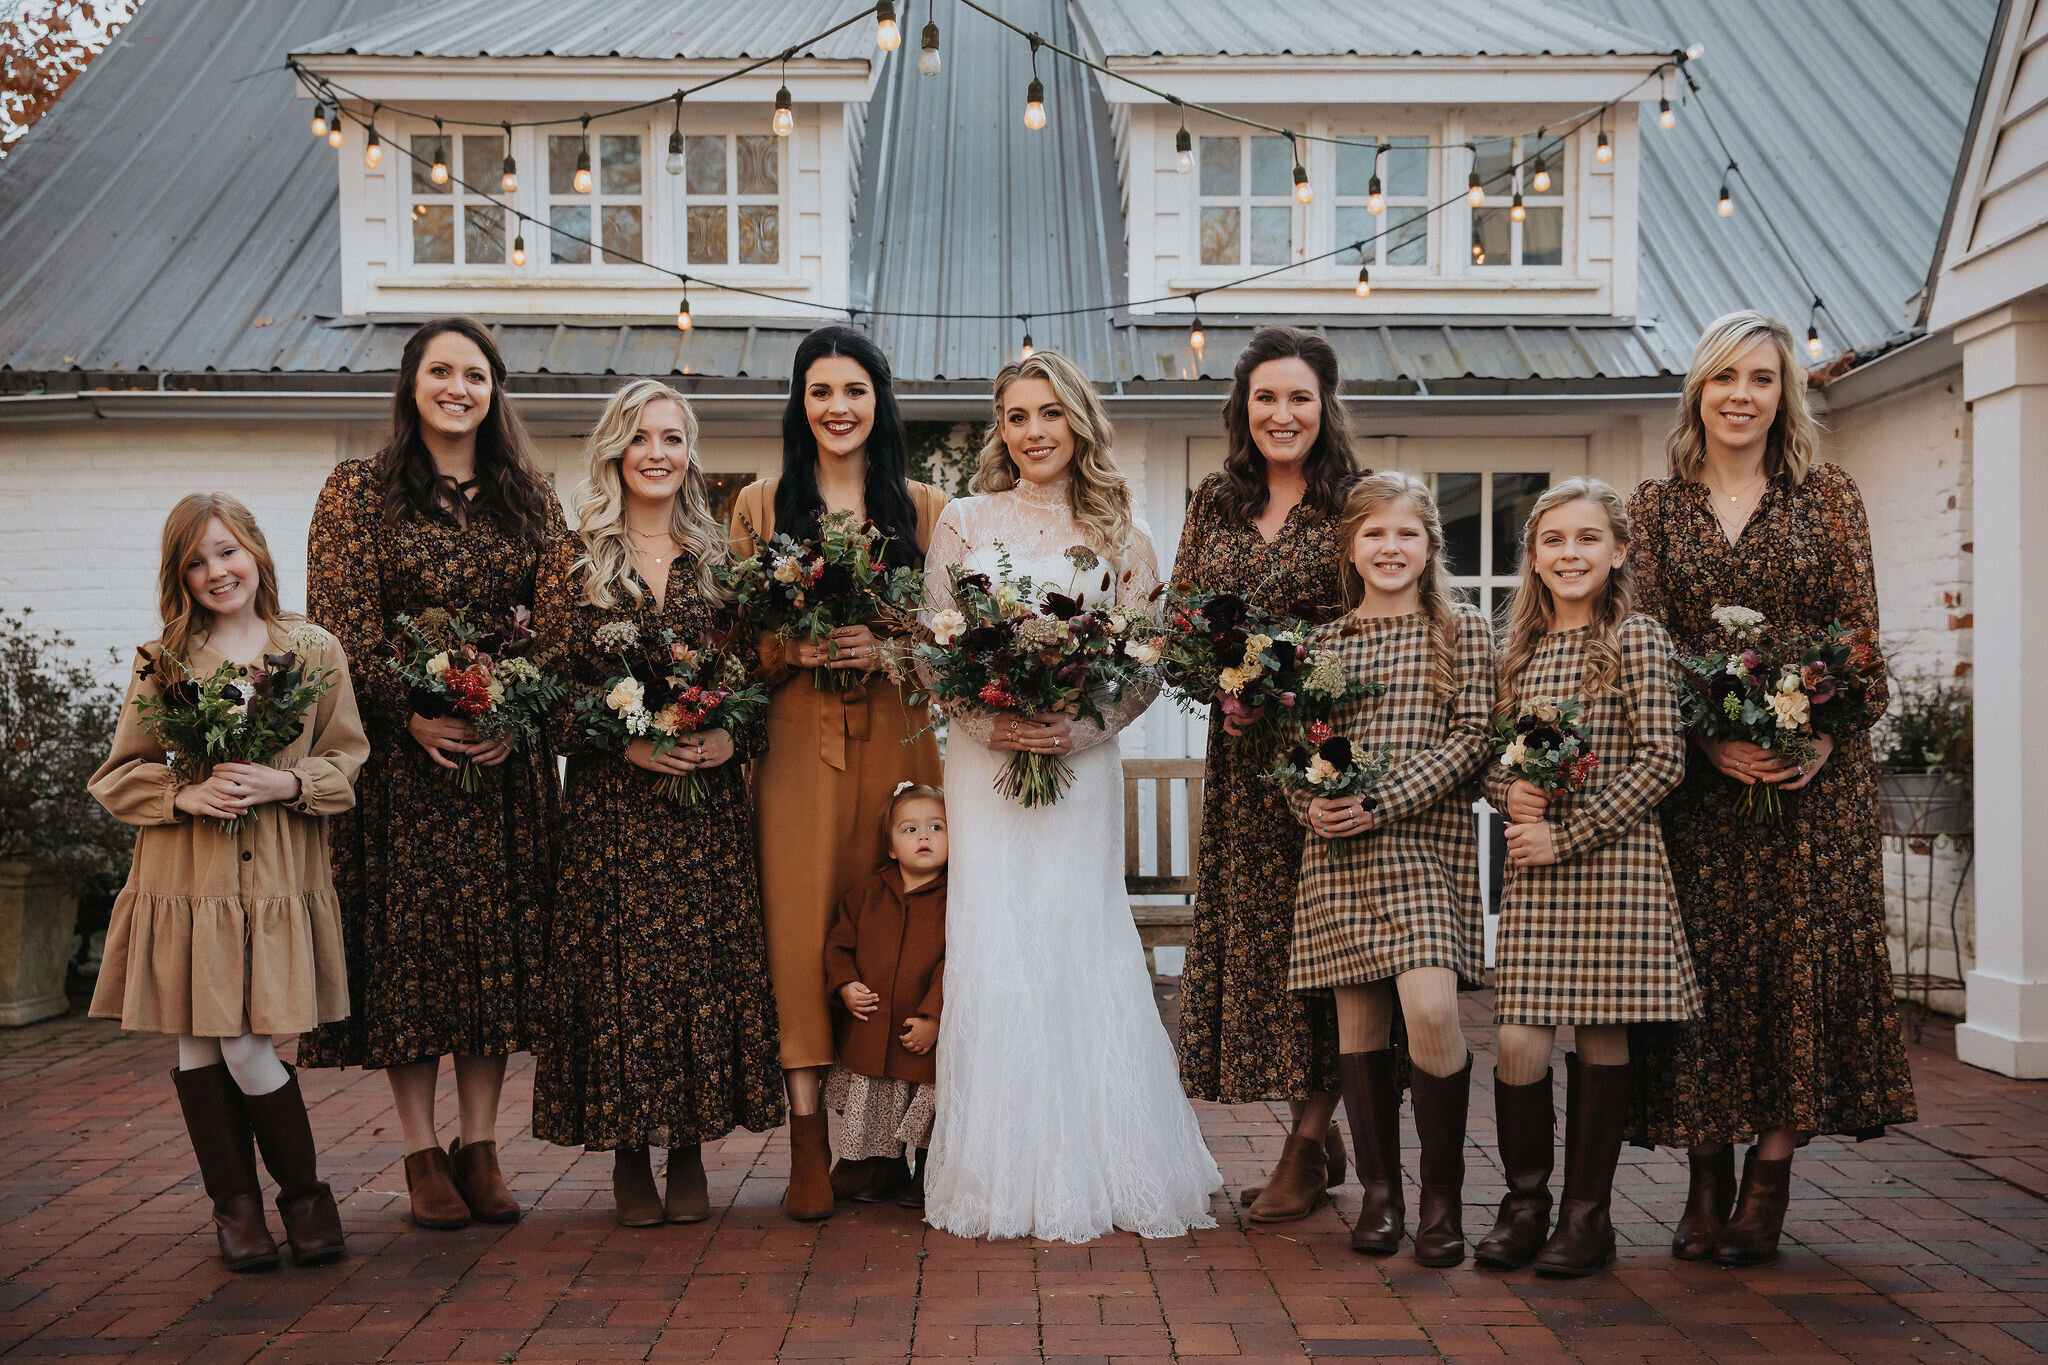 Romantic and earthy bridesmaid's bouquets filled Chocolate Cosmos, Queen Ann's Lace, Baby Eucalyptus, Rust Bunny Tails, Festival Bush, Antique Carnations, Burgundy Ranunculus, and Brown Lisianthus. Designed by Nashville wedding floral designer, Rose…